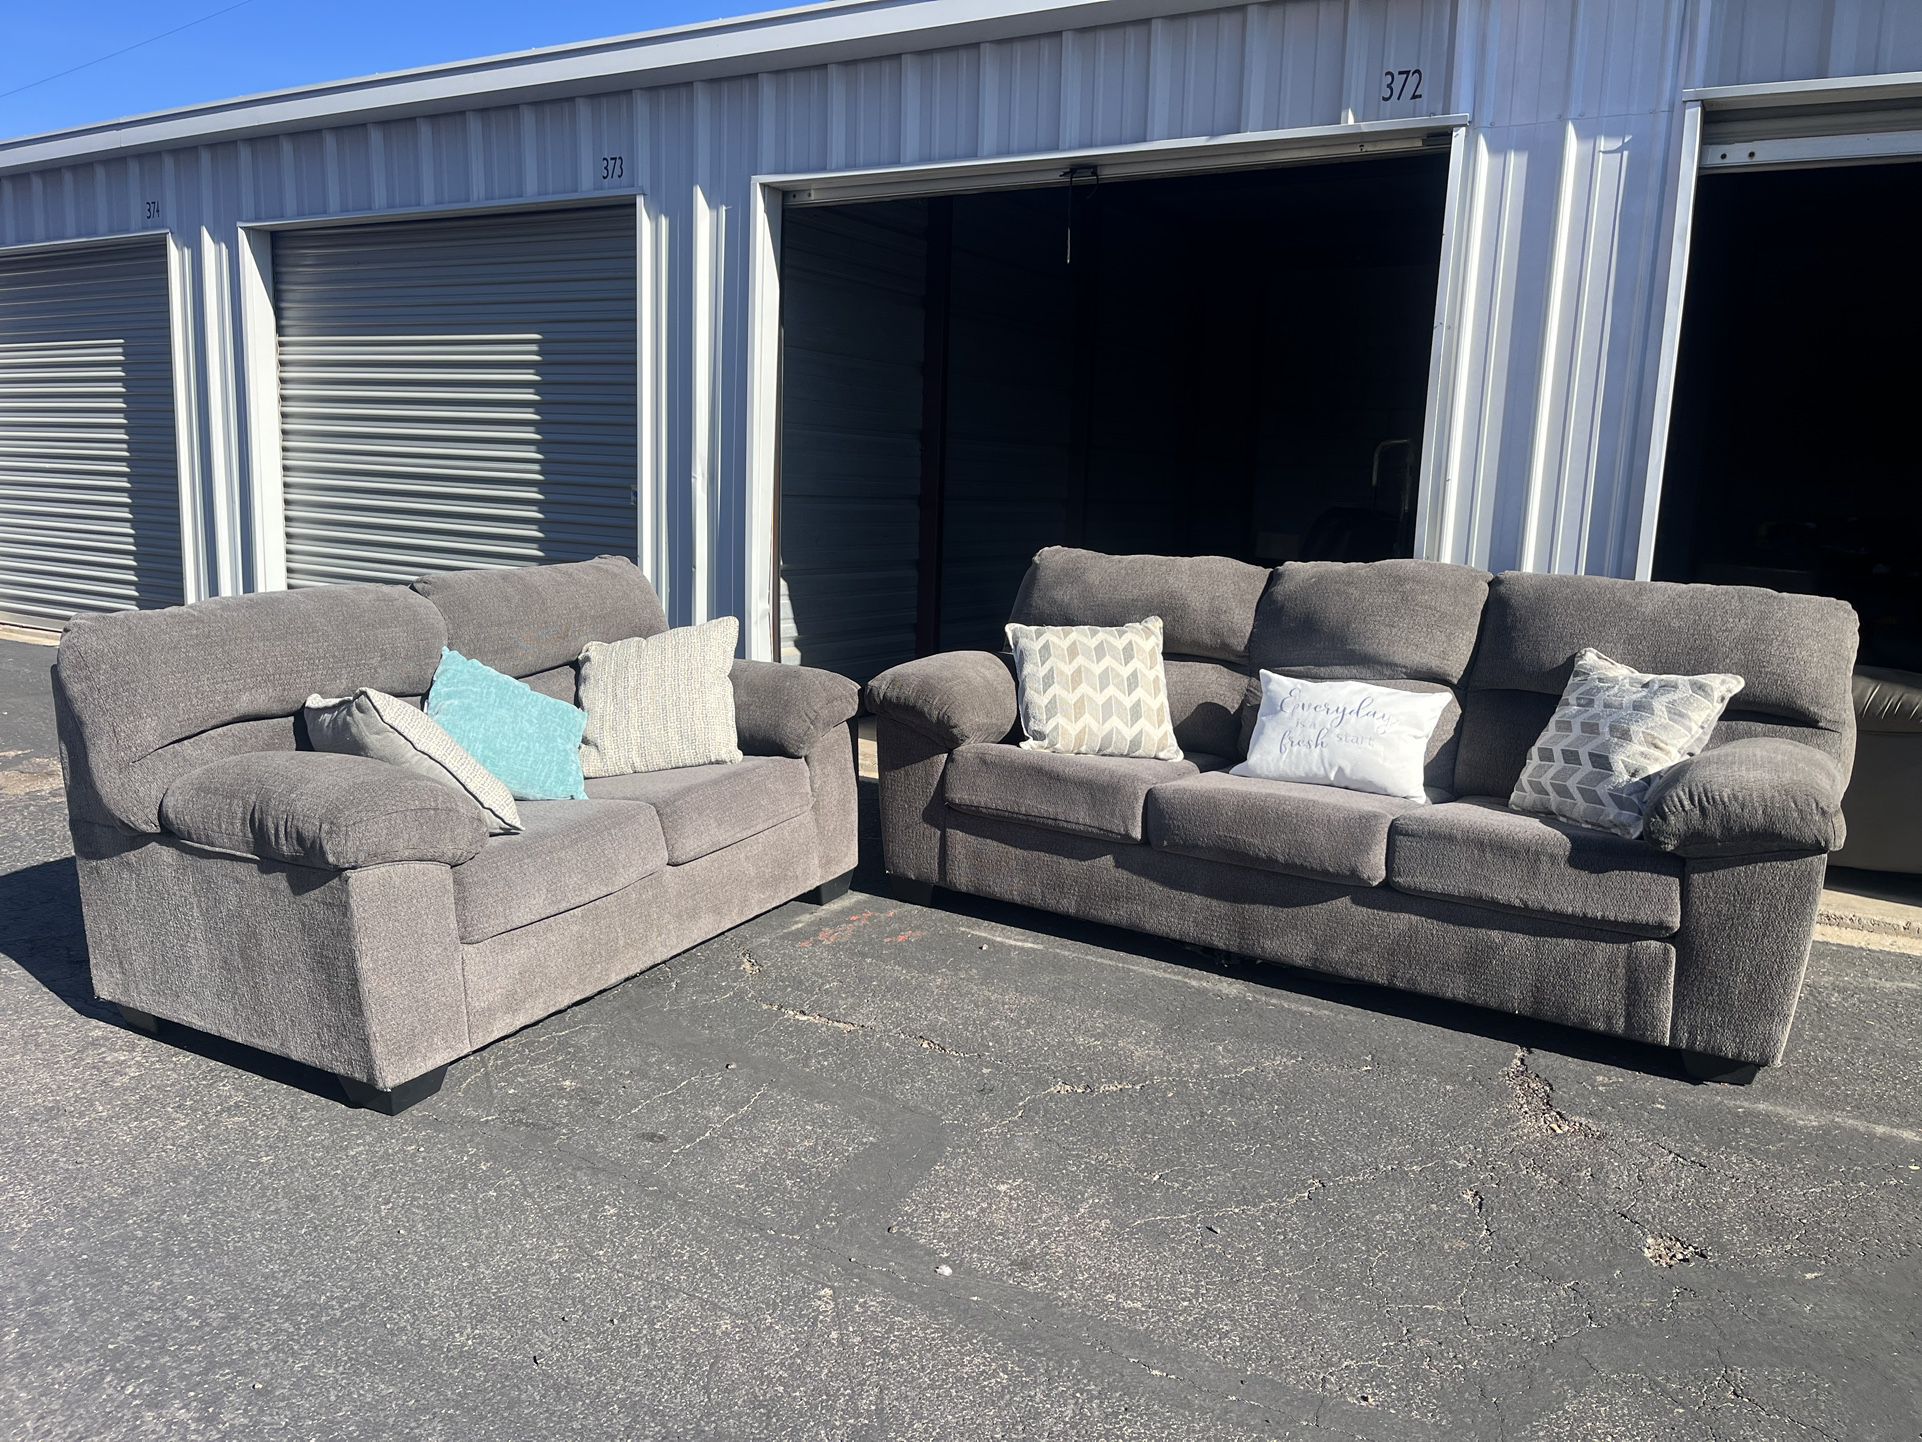 5 Seat Sectional Couches Free Delivery 